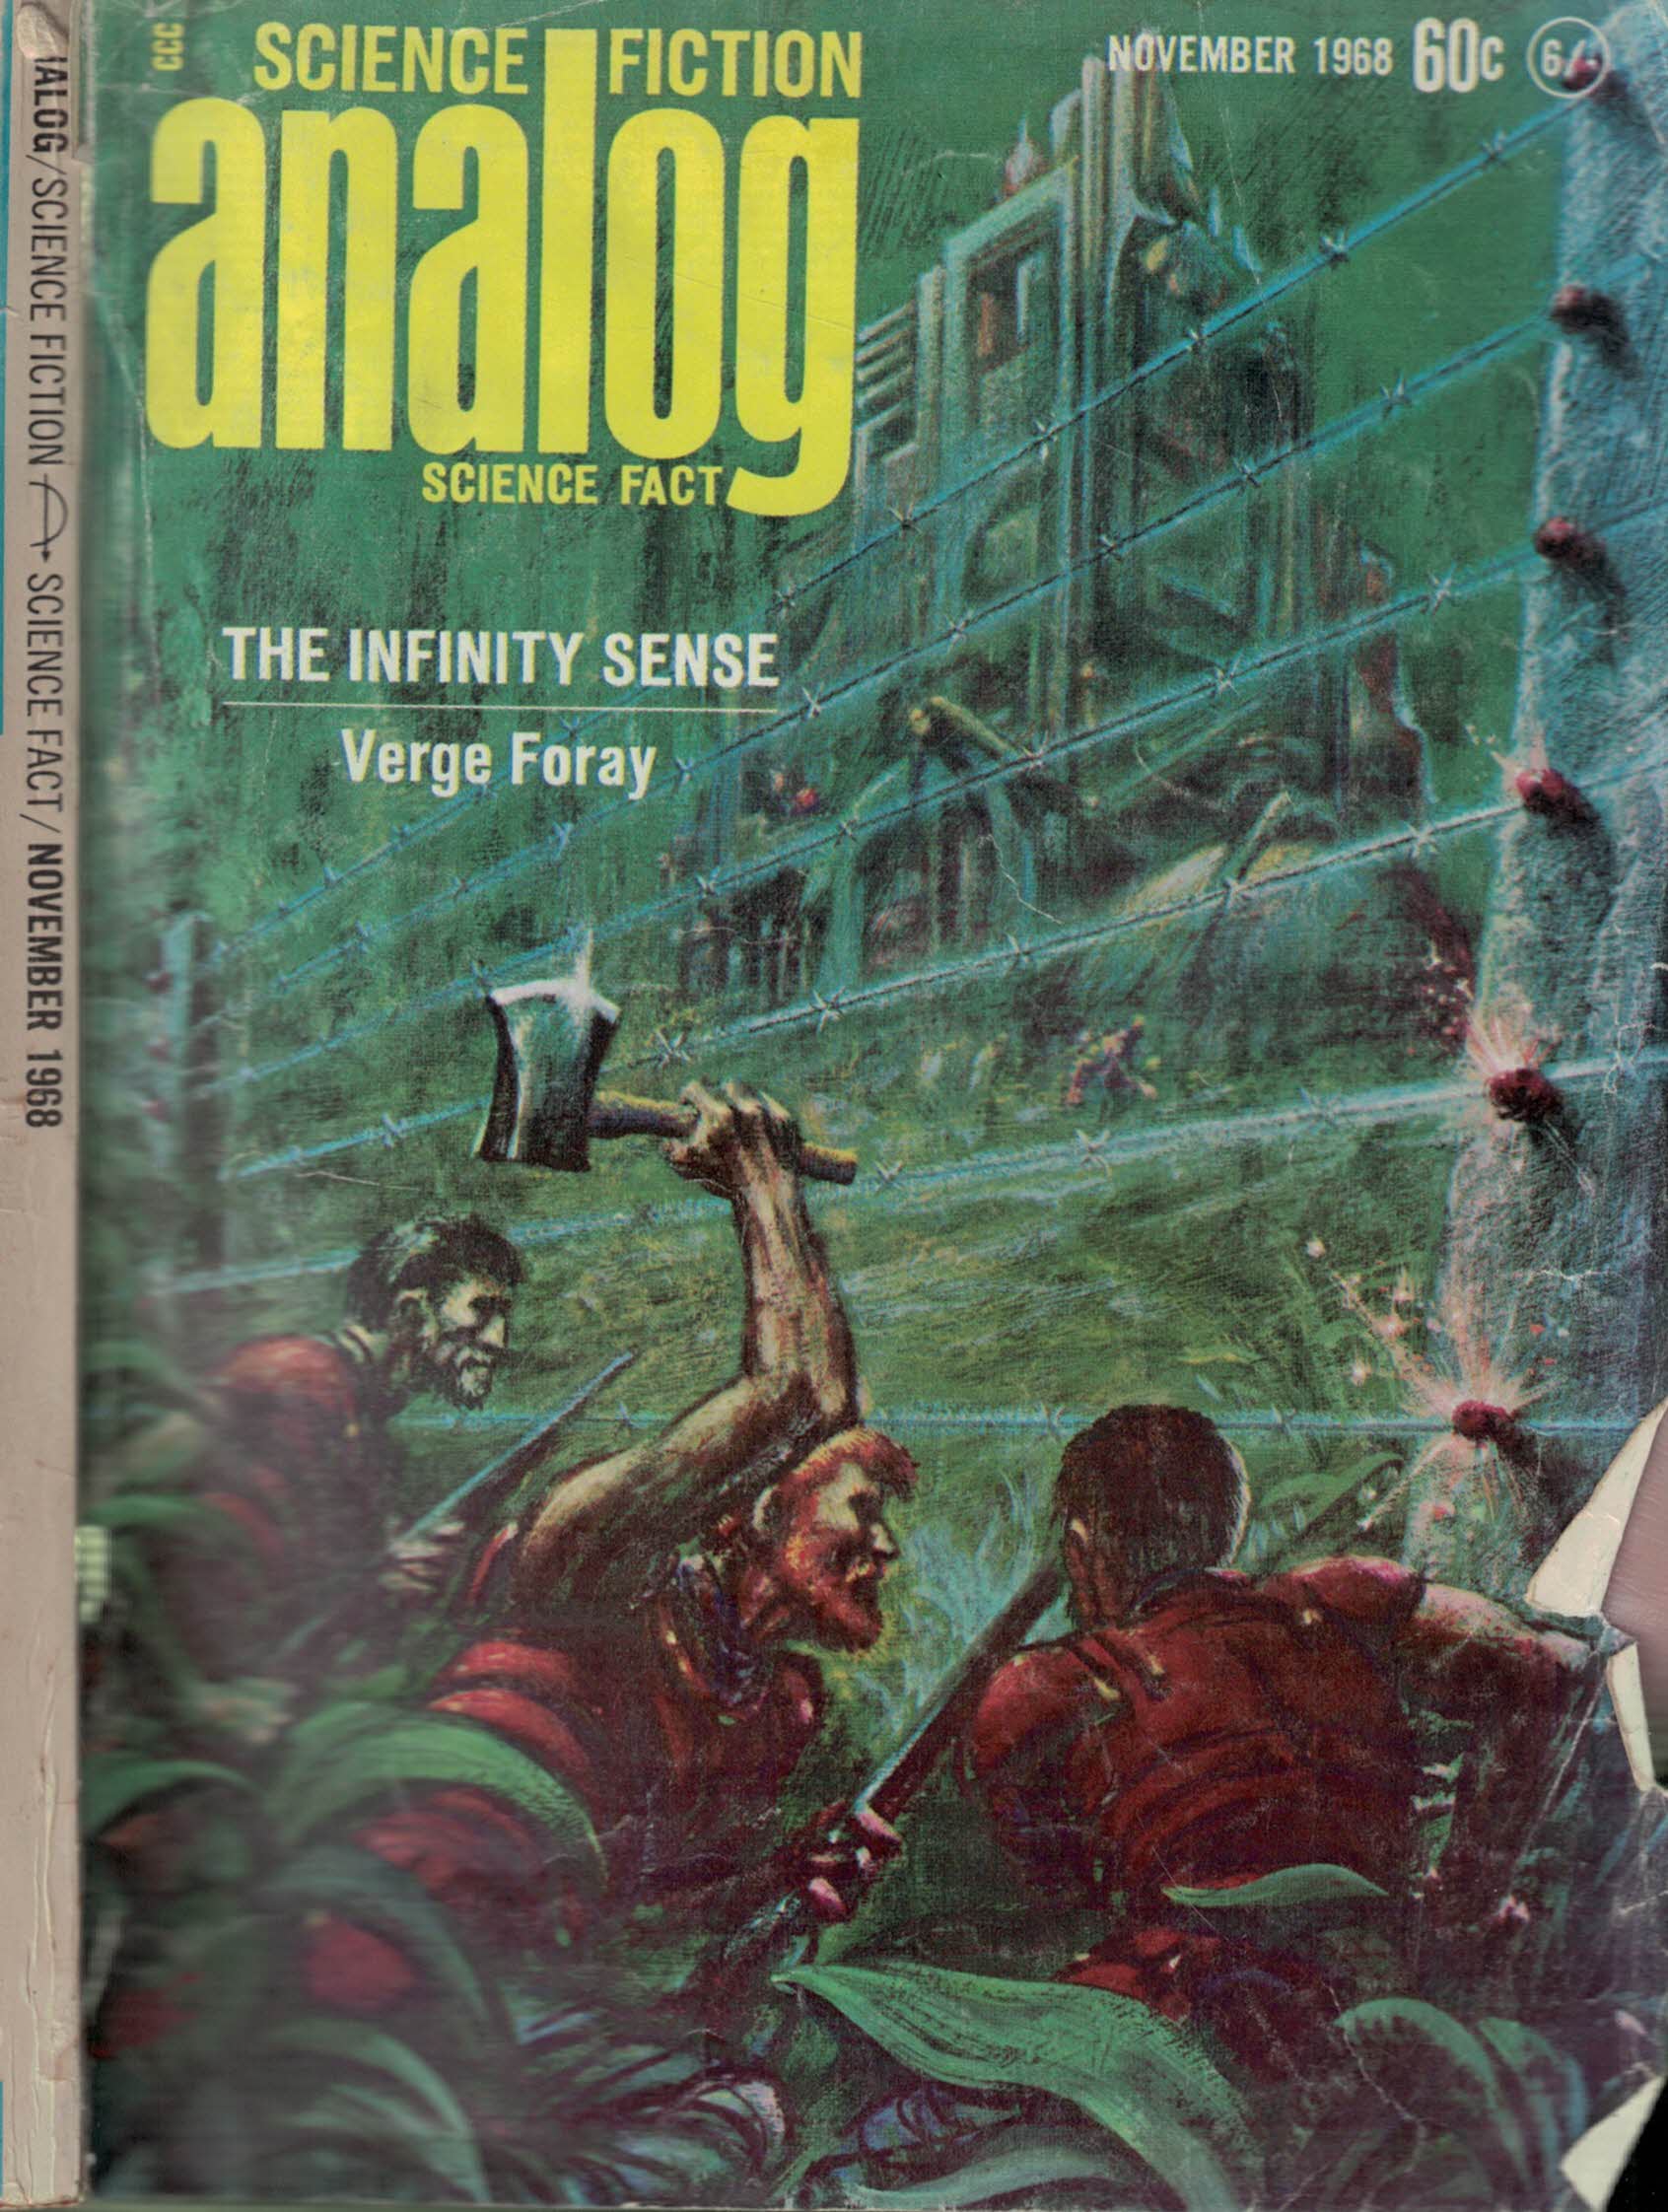 Analog. Science Fiction and Fact. Volume 82, Number 3. November 1968.